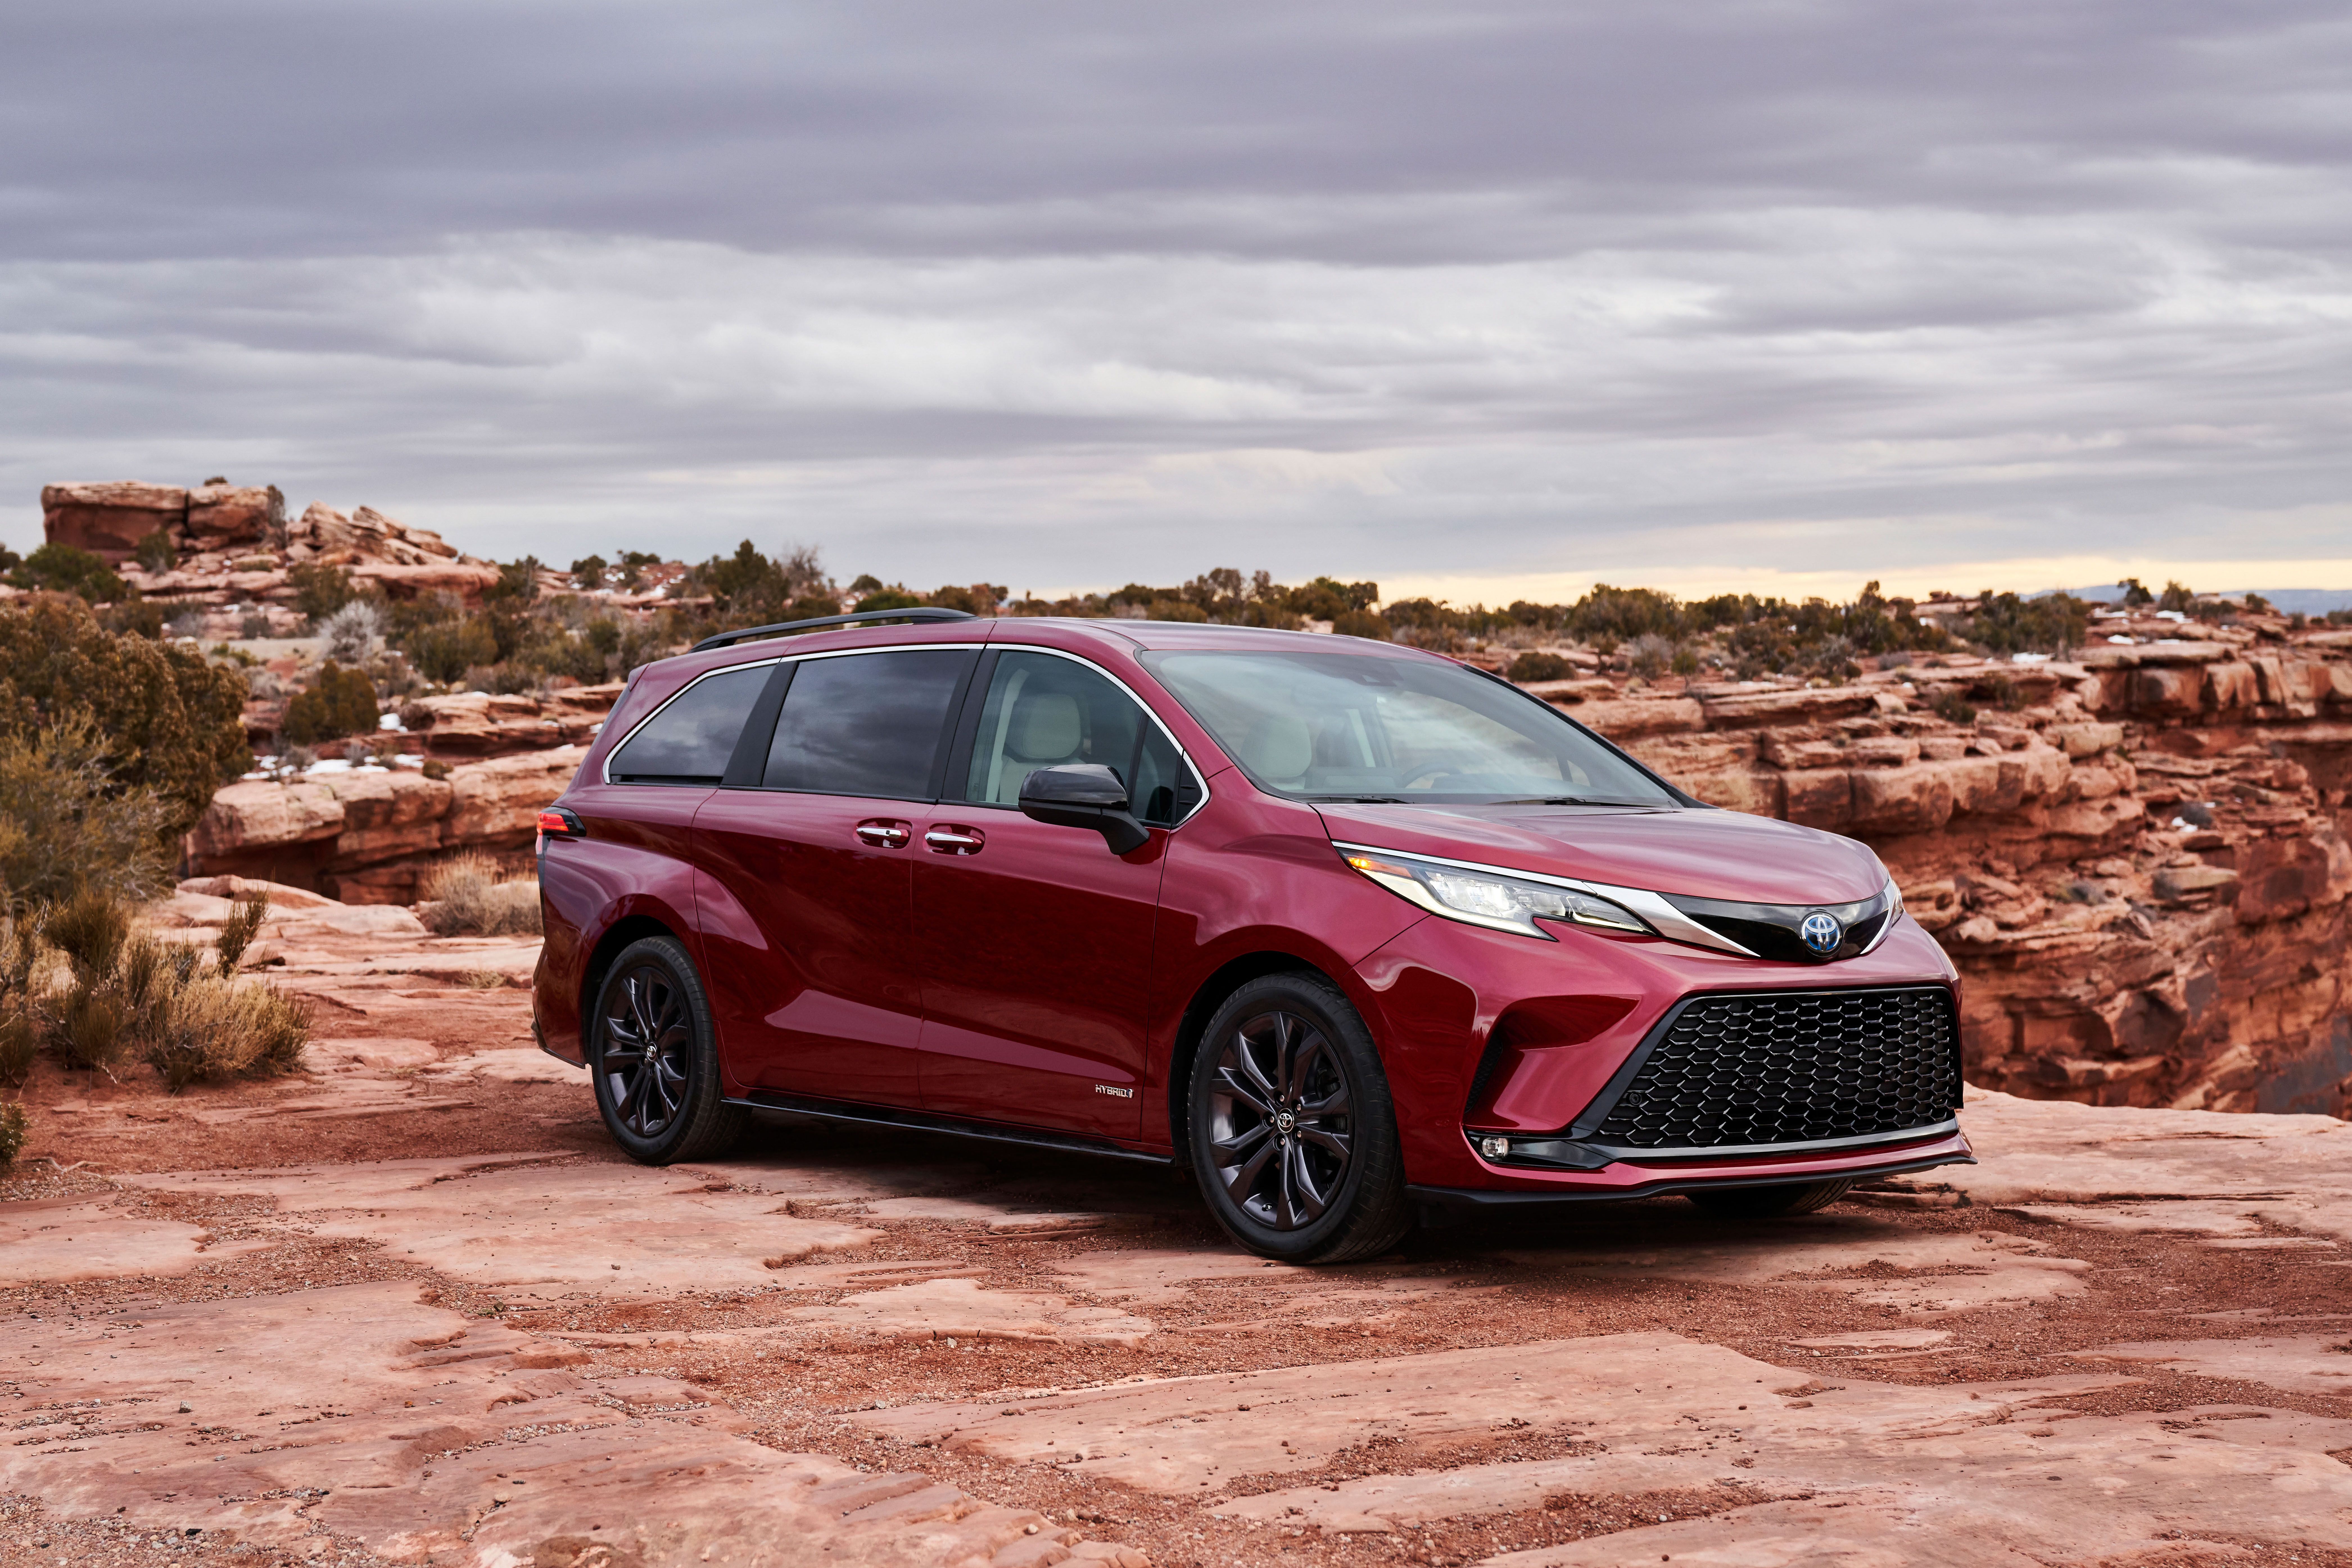 How Does 2021 Toyota Sienna Stack Up to the Pacifica and Odyssey?